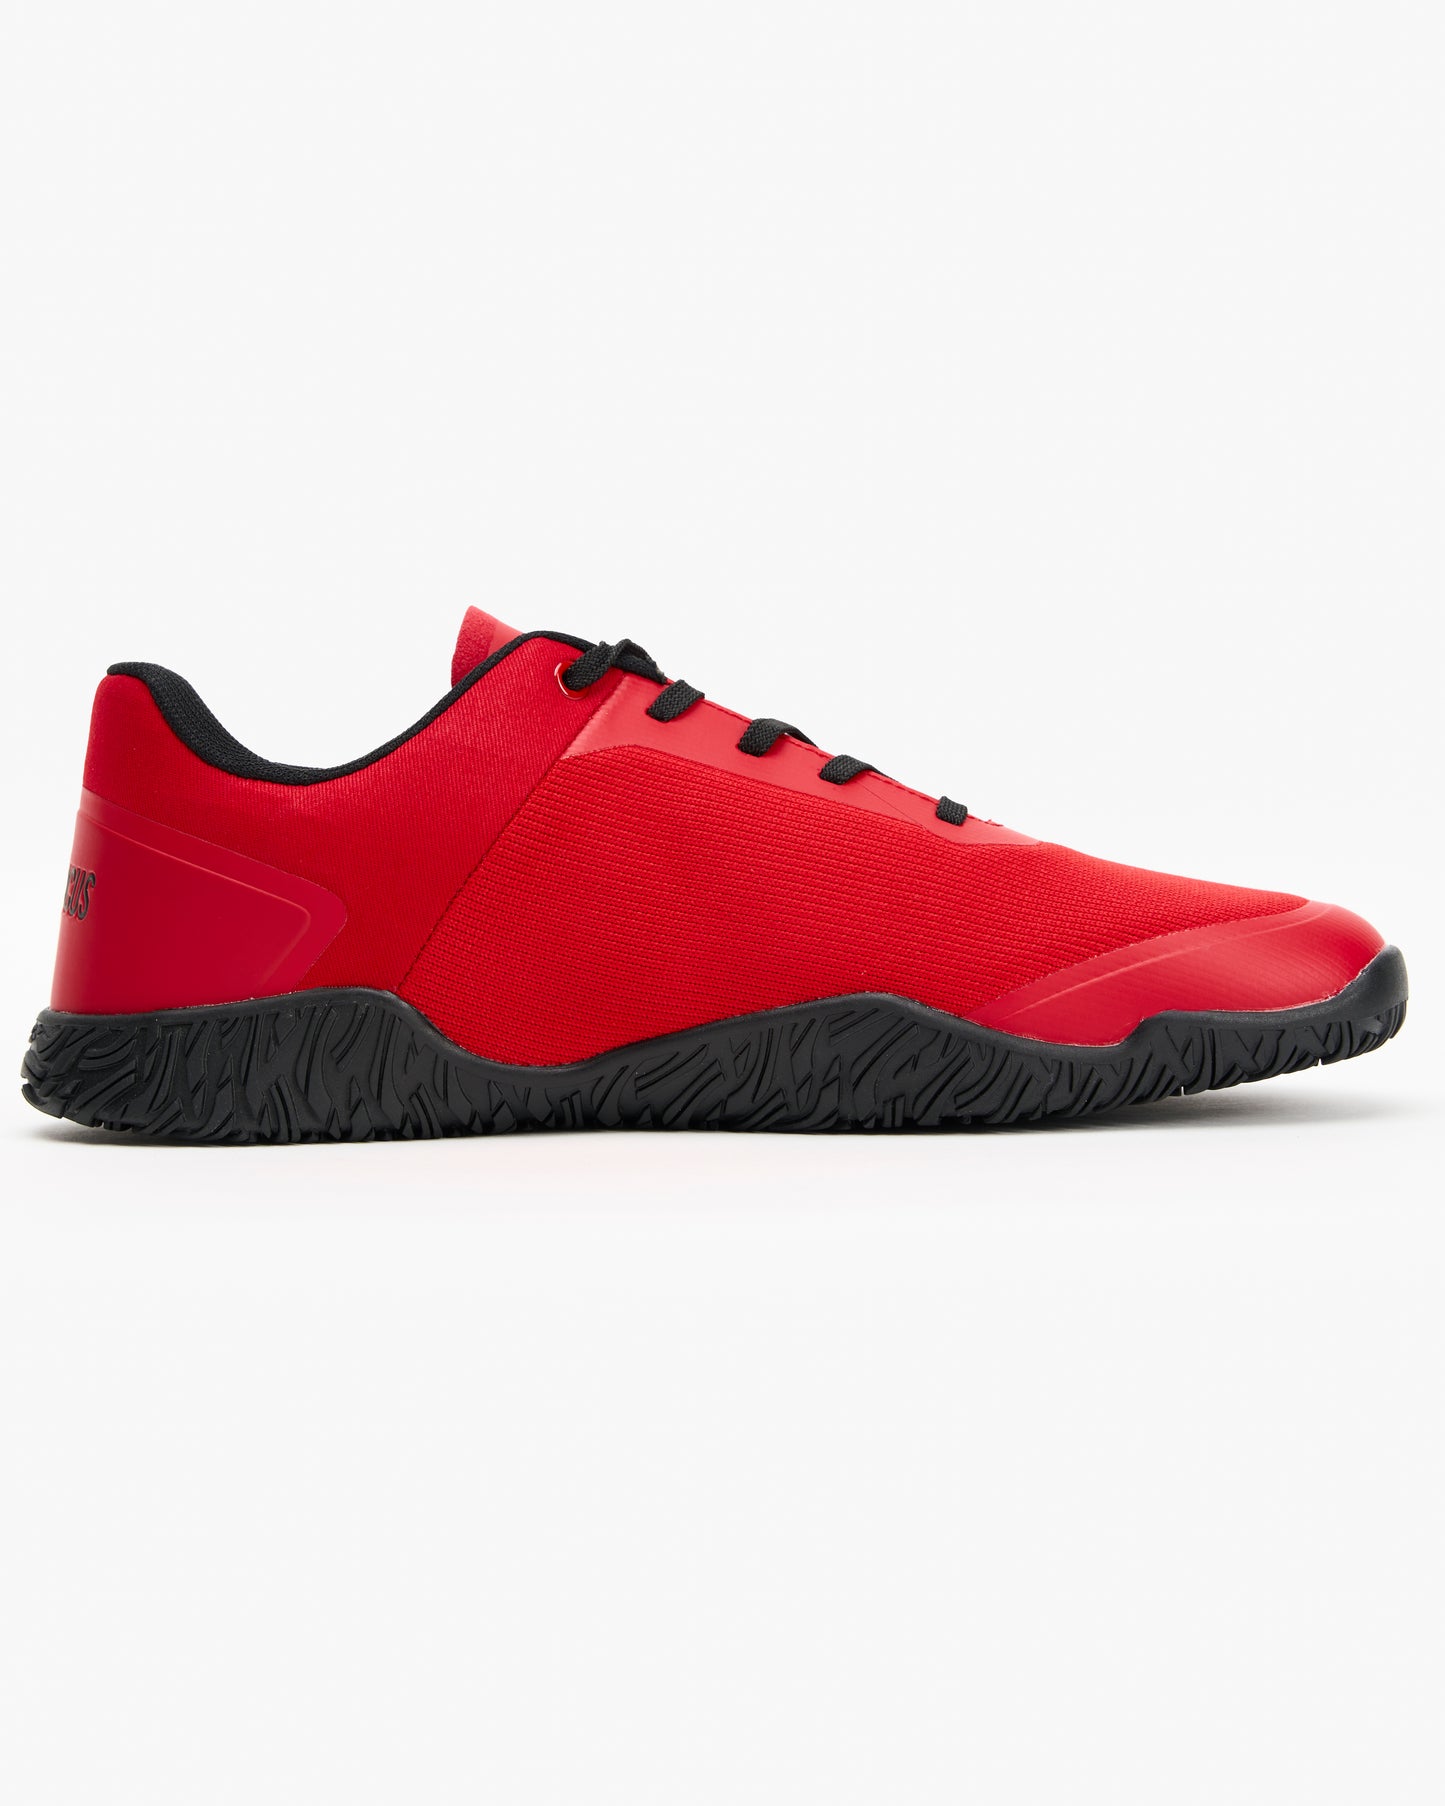 Avancus Apex Power Shoes 1.5 (Red/Black) - Limited Edt